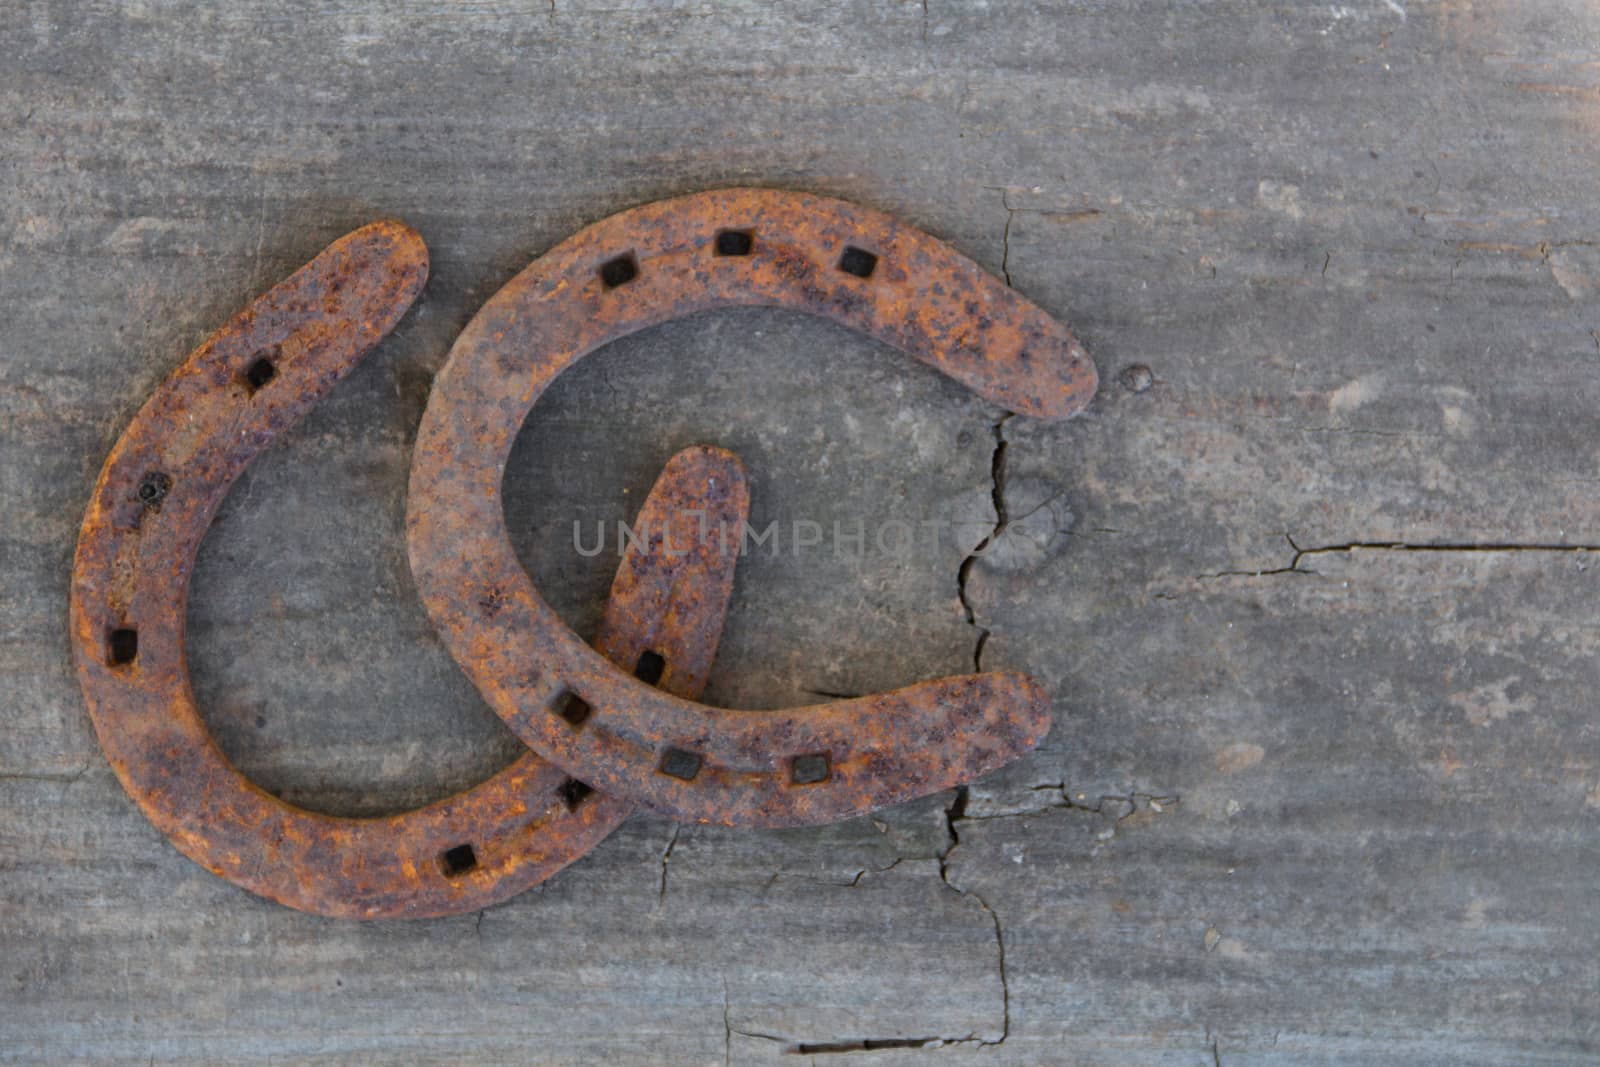 old rusty horseshoes on rustic wood with place for text